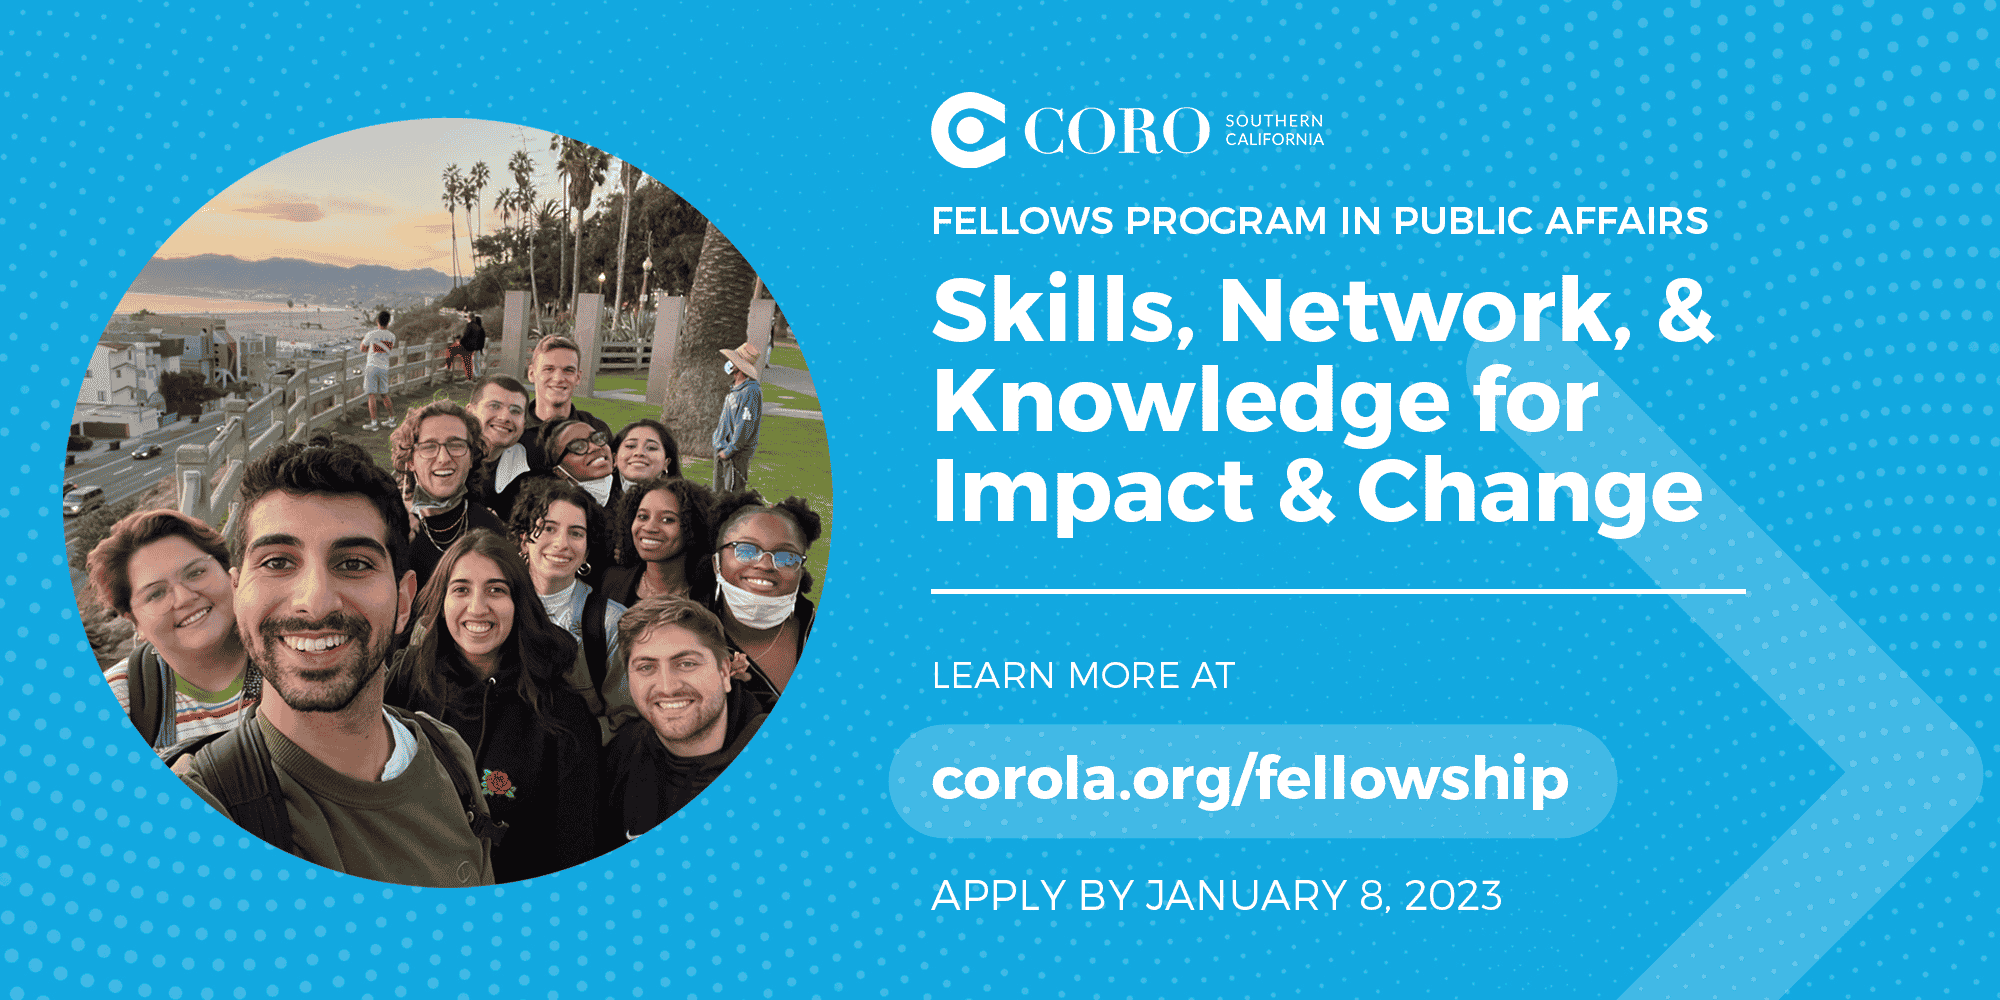 A photo of the Coro Fellows with the words "Fellows program in public affairs. Skills, Network and Knowledge for Impact and Change. Learn more at corola.org/fellowship"